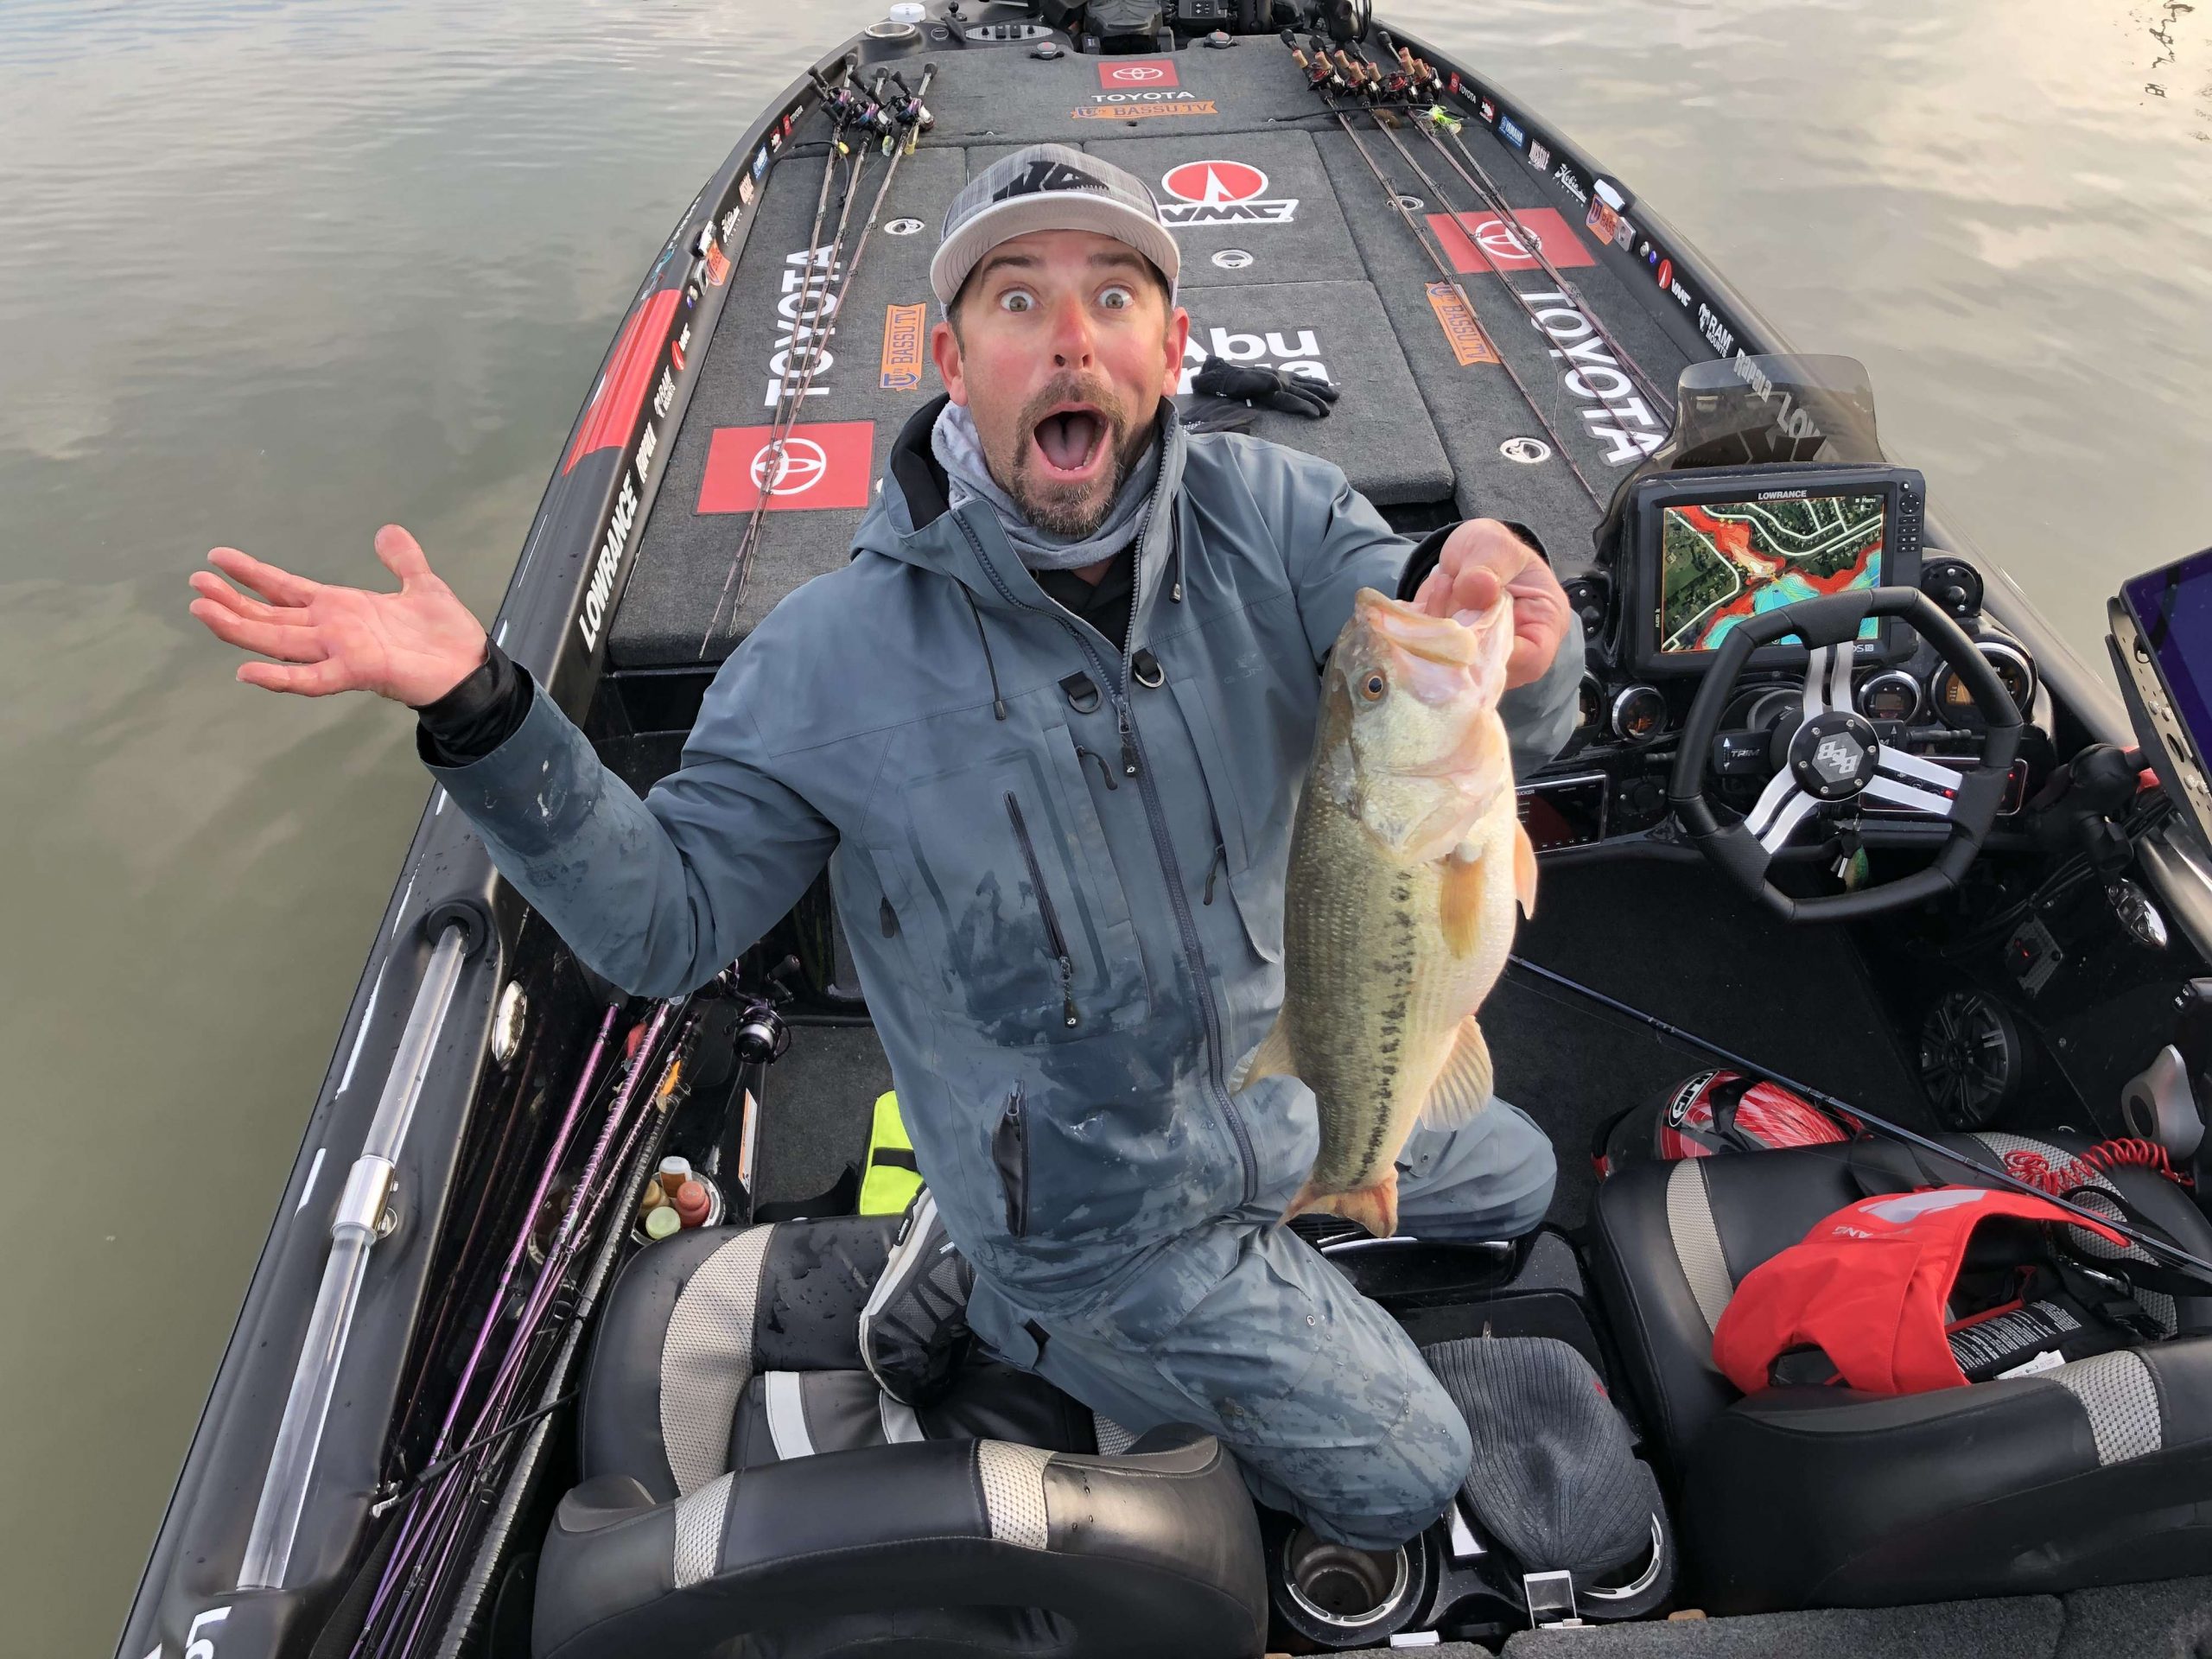 Iaconelli first fish is a good one.  Needless to say heâs fired up.